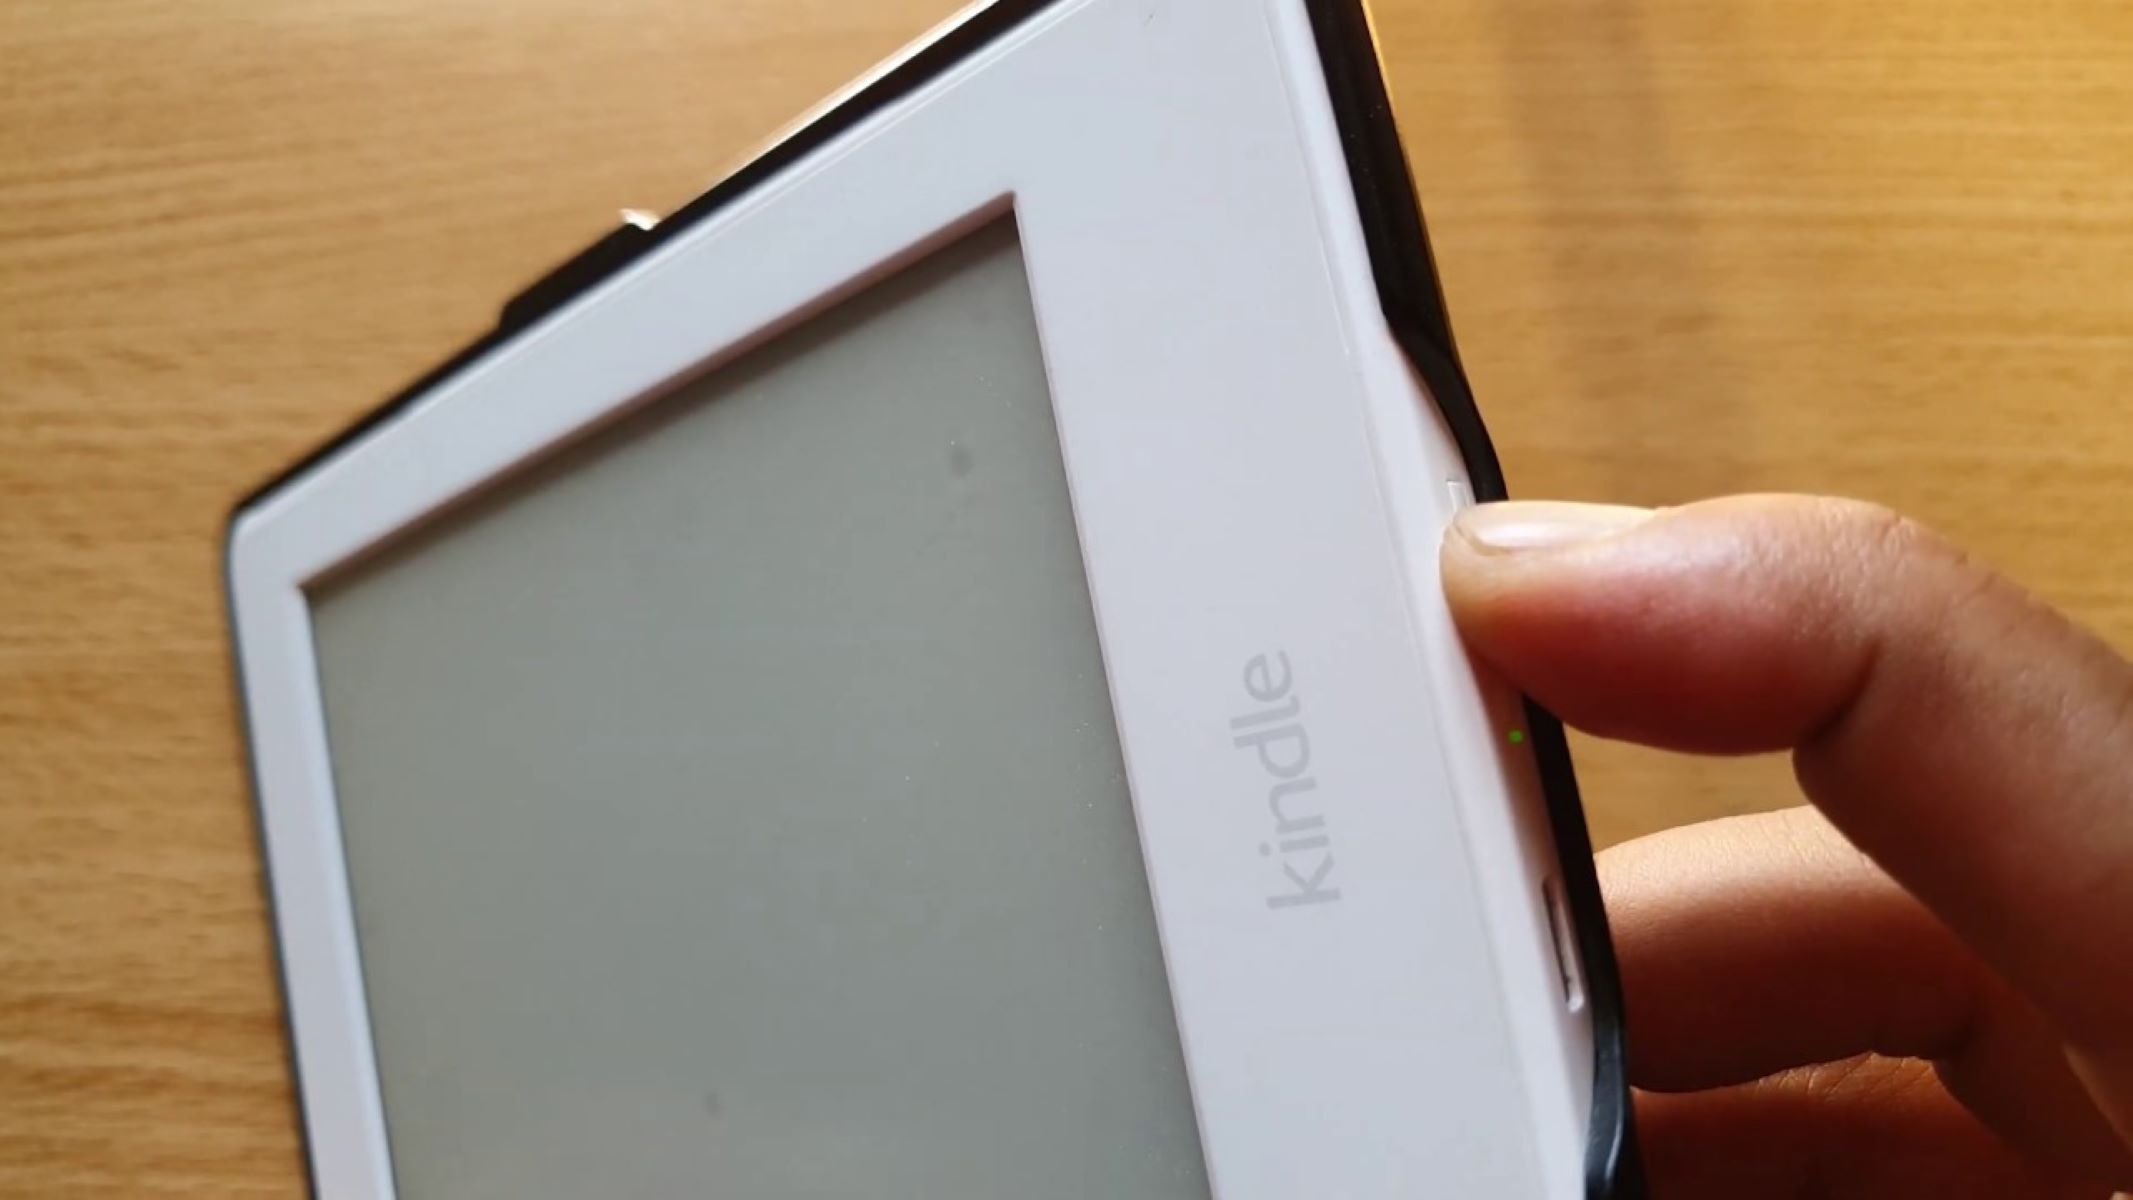 How To Turn Off A Kindle Paperwhite